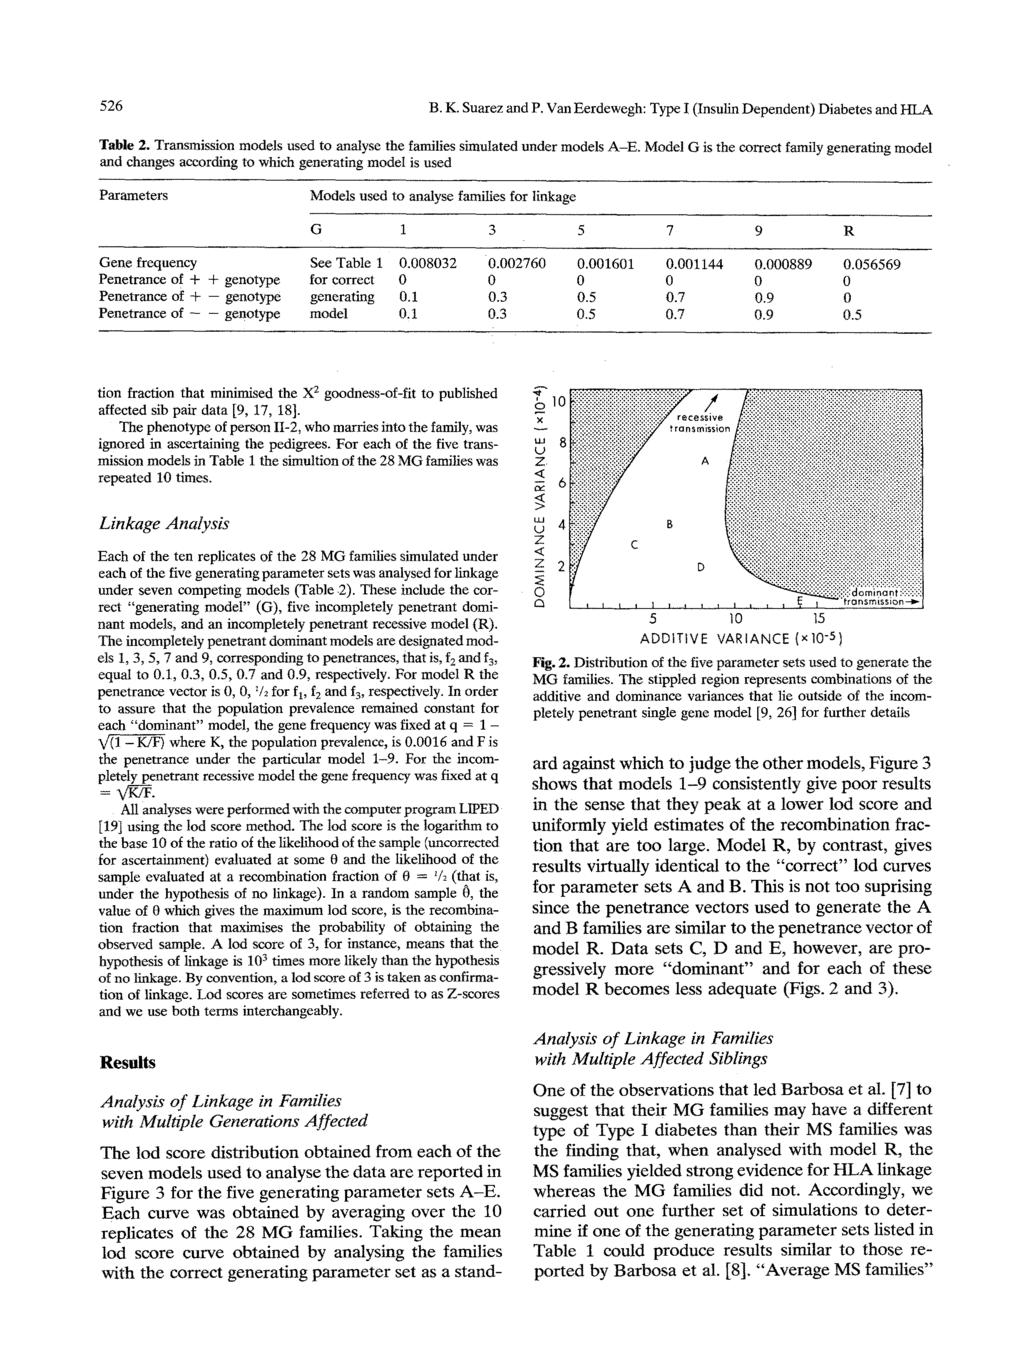 526 B.K. Suarez and P. Van Eerdewegh: Type I (Insulin Dependent) Diabetes and HLA Table 2. Transmission models used to analyse the families simulated under models A-E.